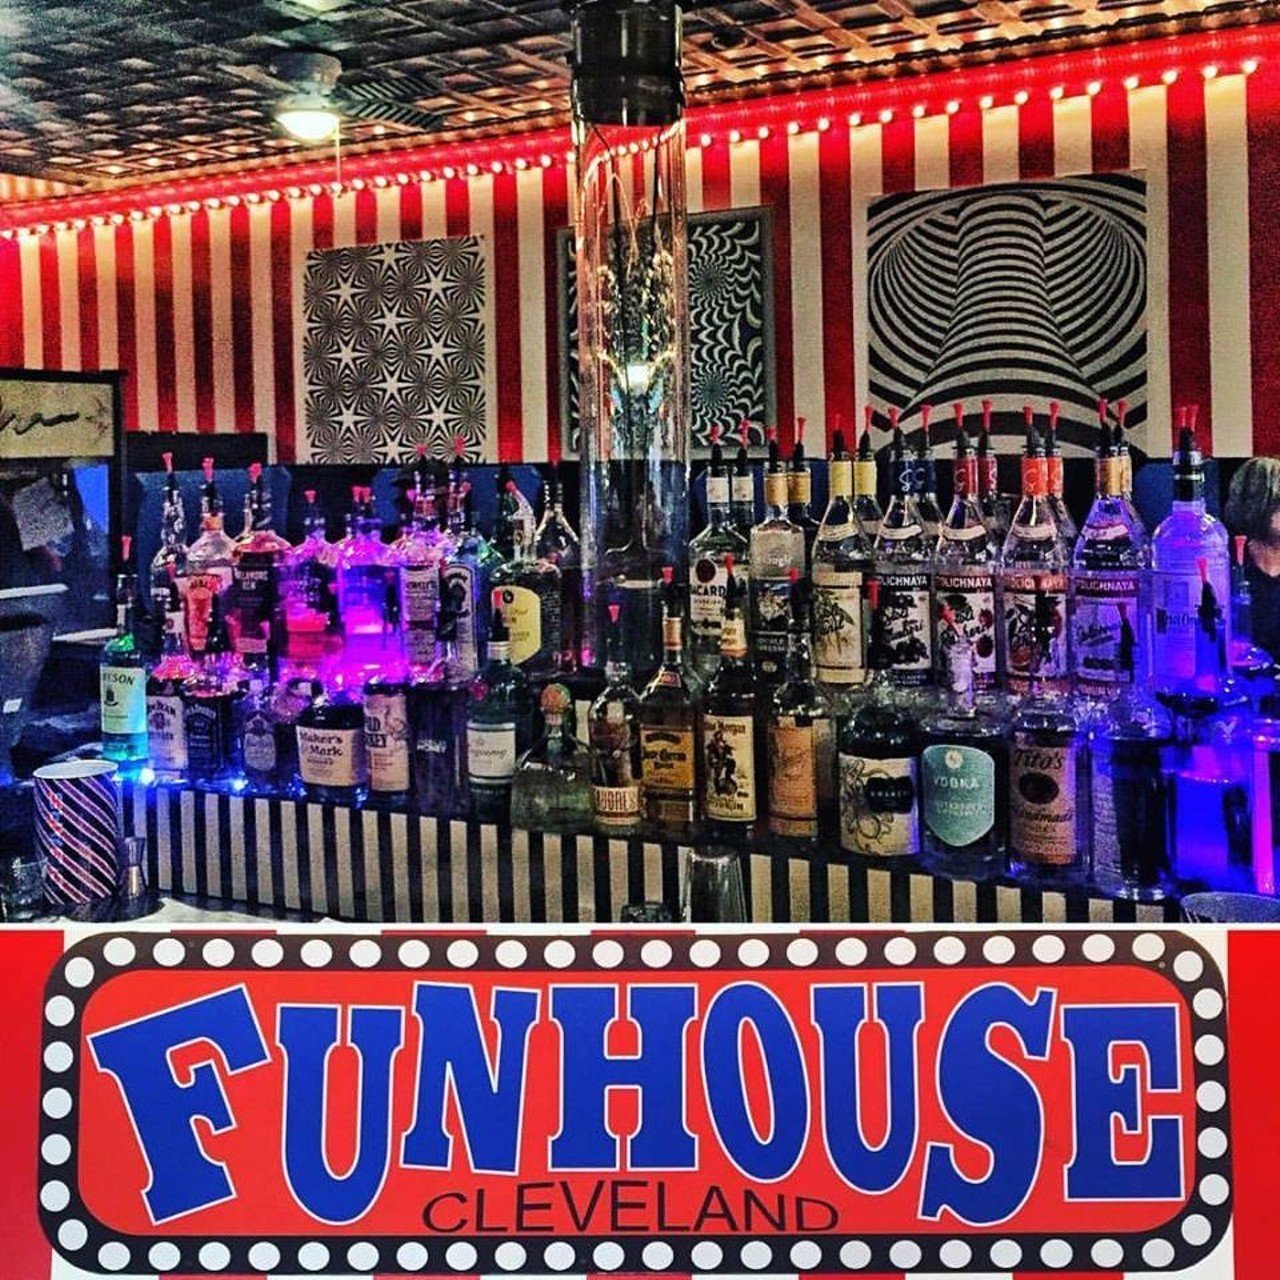  Funhouse
1539 West 117th St., Lakewood  
This small dive bar is truly like no other in town. They of course have beer on tap and interesting signature drinks but they also have a sushi machine, a cotton candy maker, corn dogs and popcorn. You can bring your dogs and even incorporate a slushy into your drink. Talk about conversation starters!